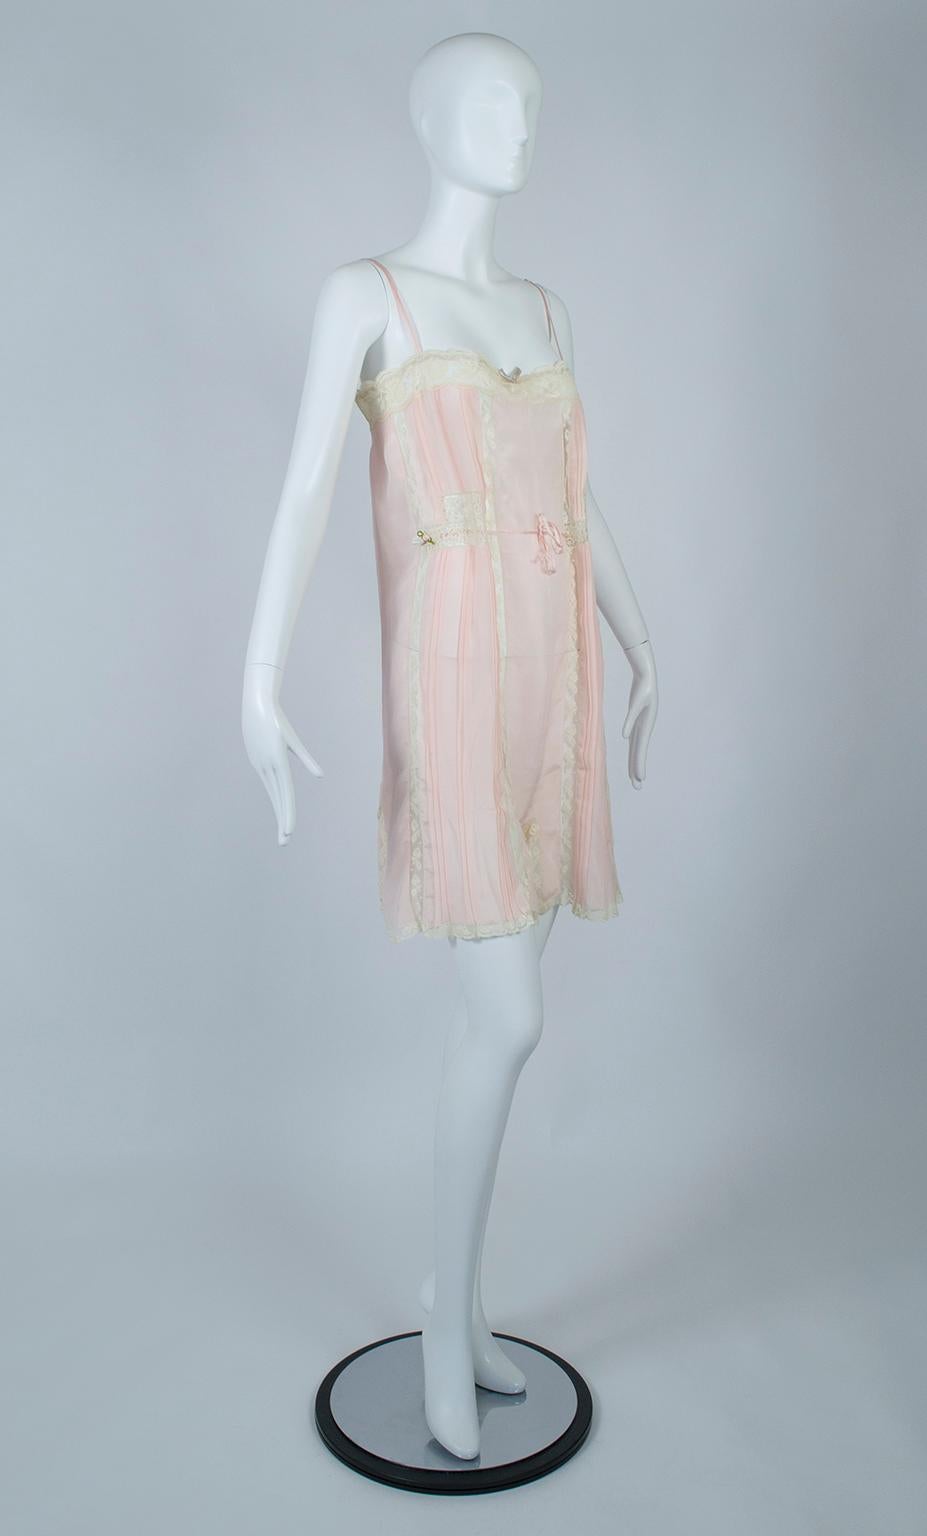 Though it looks and wears like a negligée, this wisp of a garment was an intermediate step between the chemise-style undergarments of the Victorian era and the separate bra and panties we wear today. Called “step-ins”, they made ideal sleepwear and